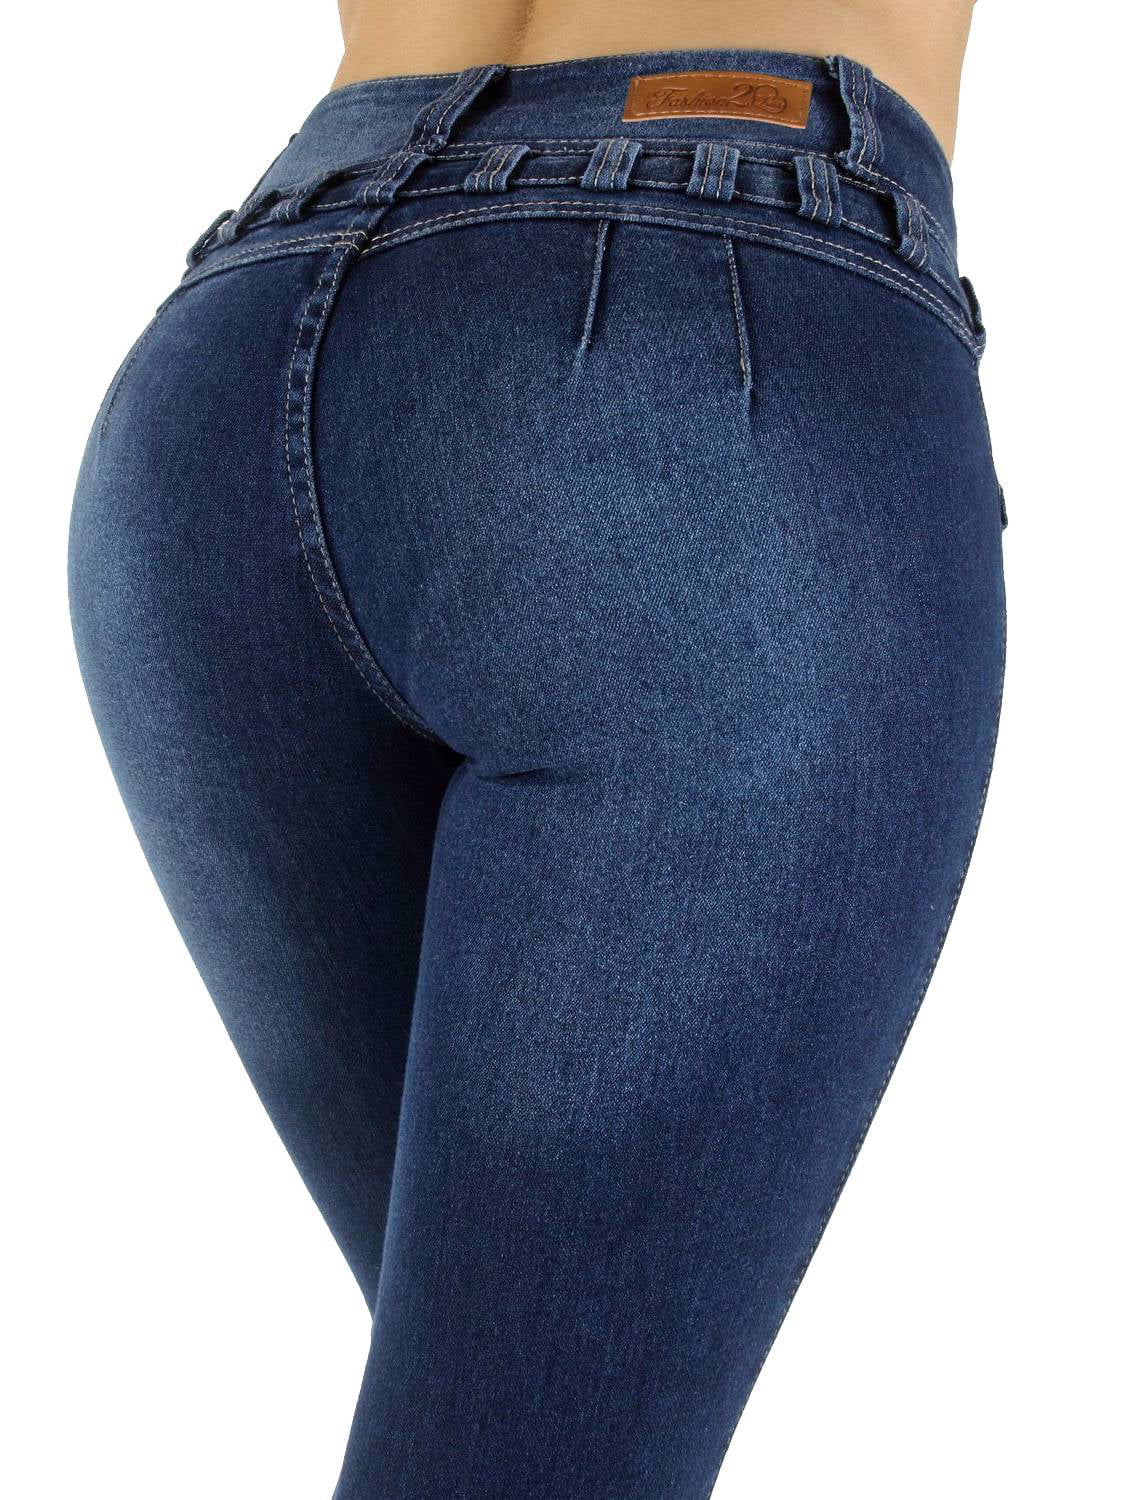 jeans that lift your bum